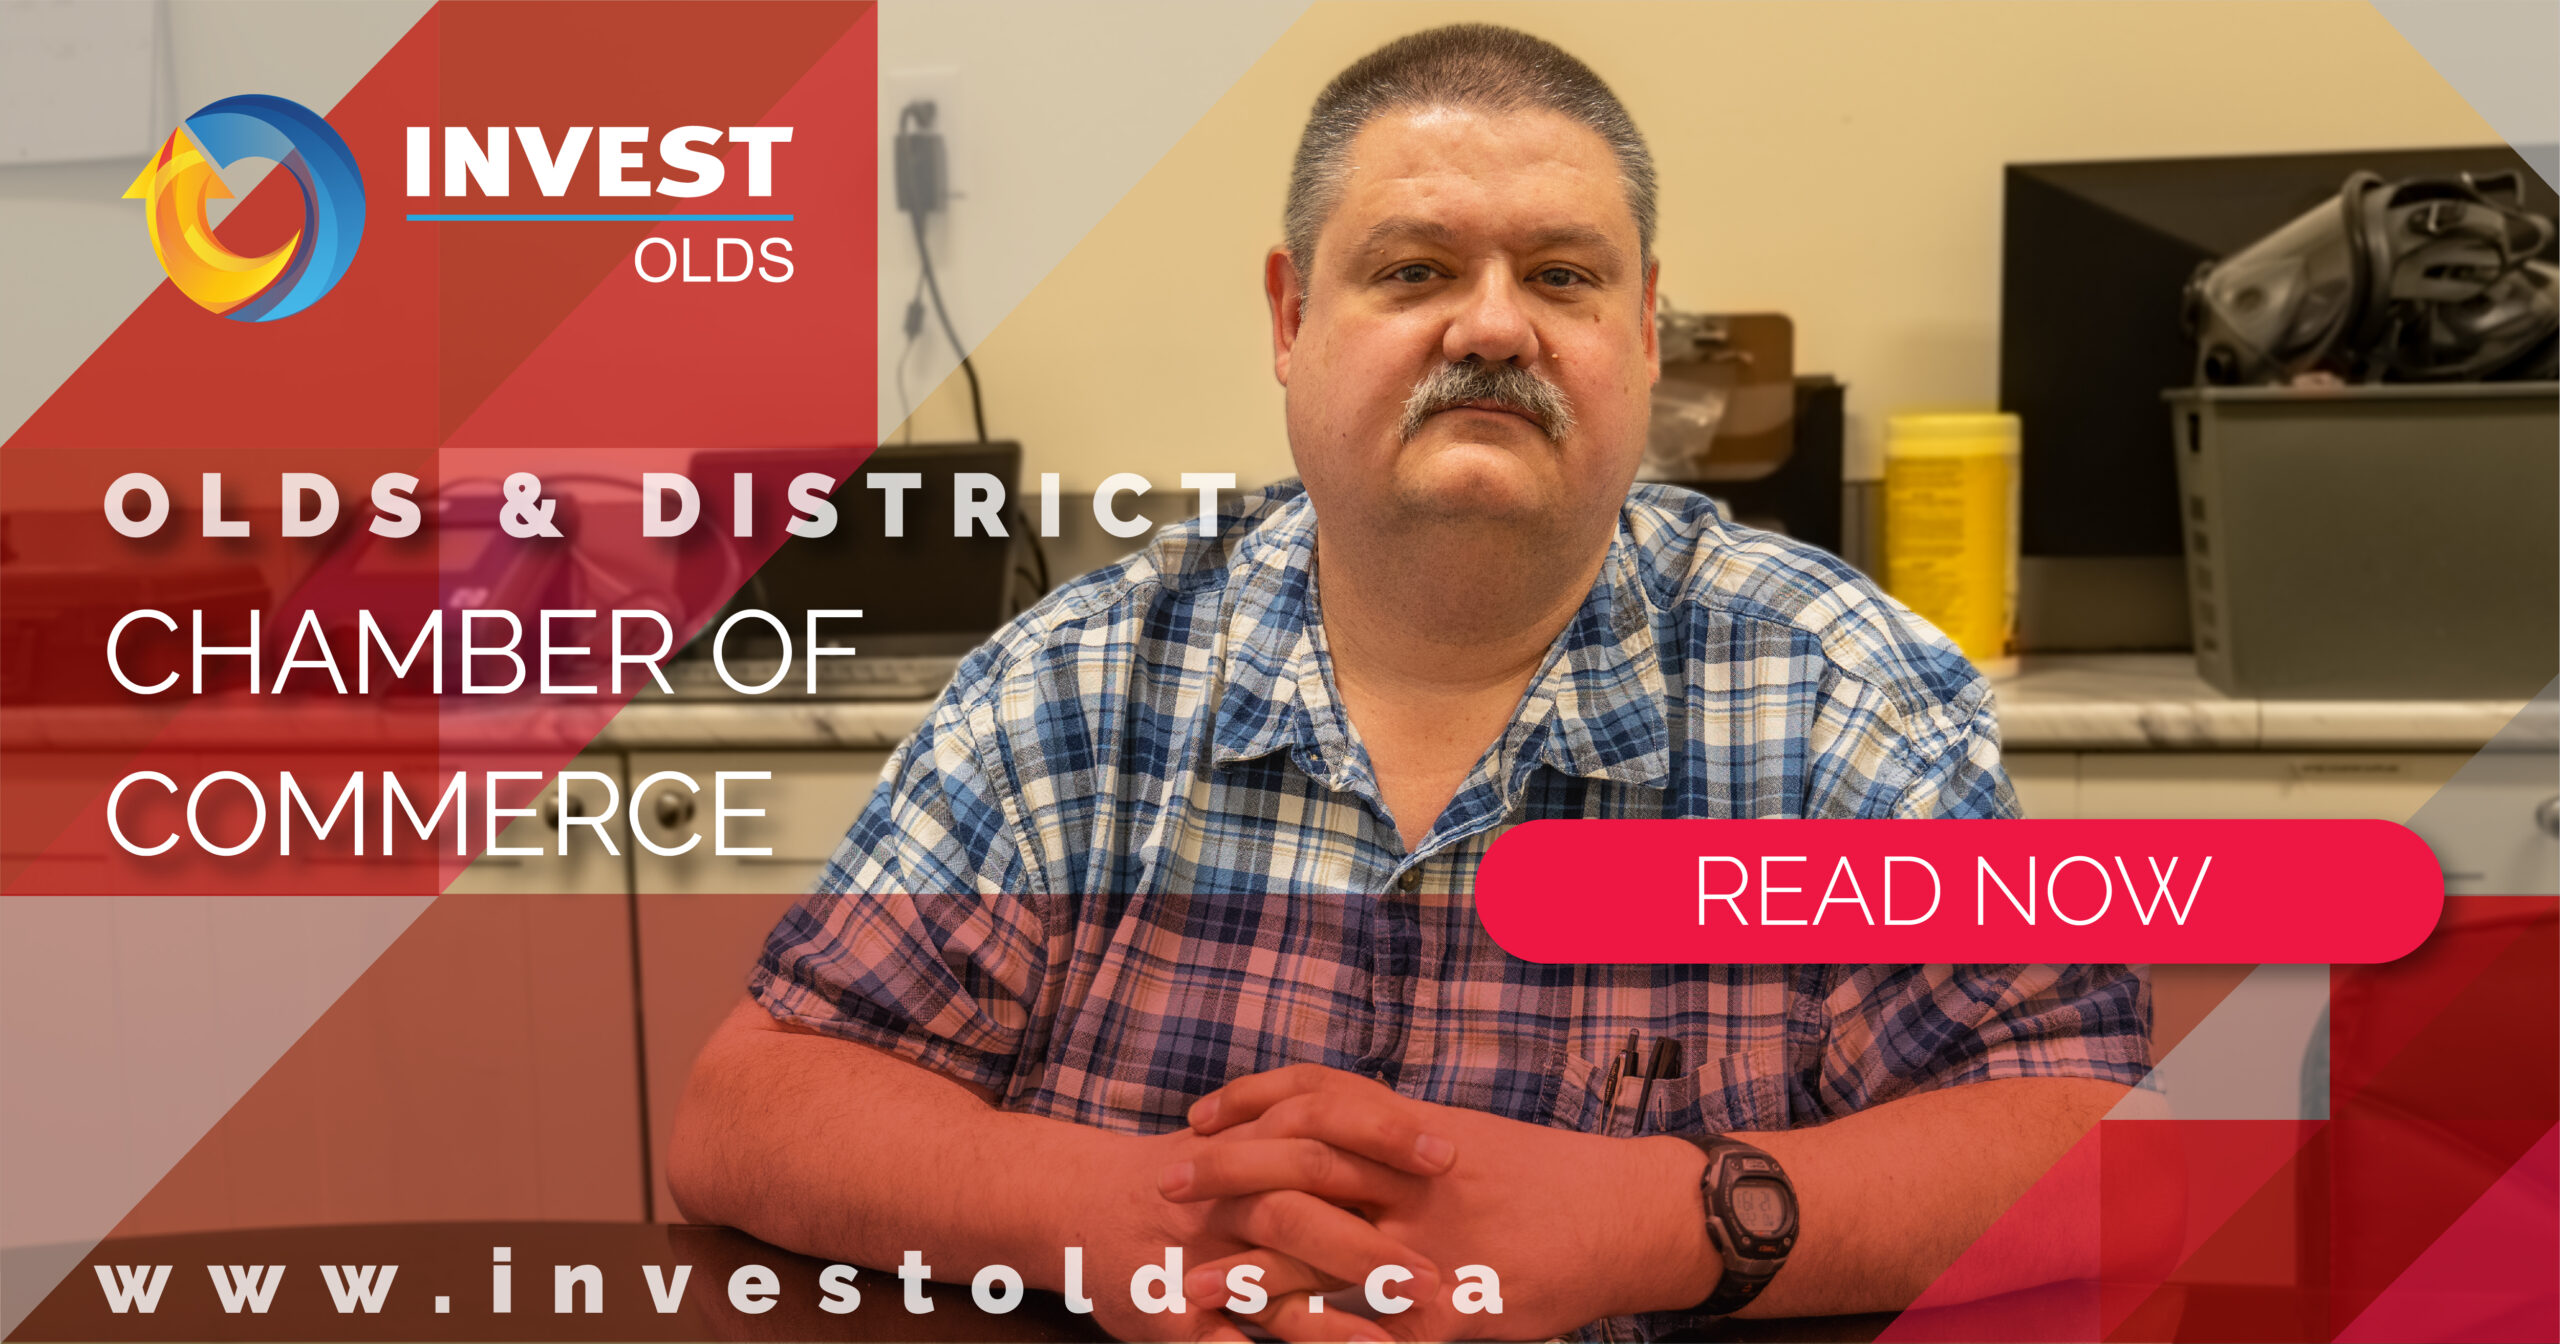 Doug Rieberger - the president of Olds & District Chamber of Commerce